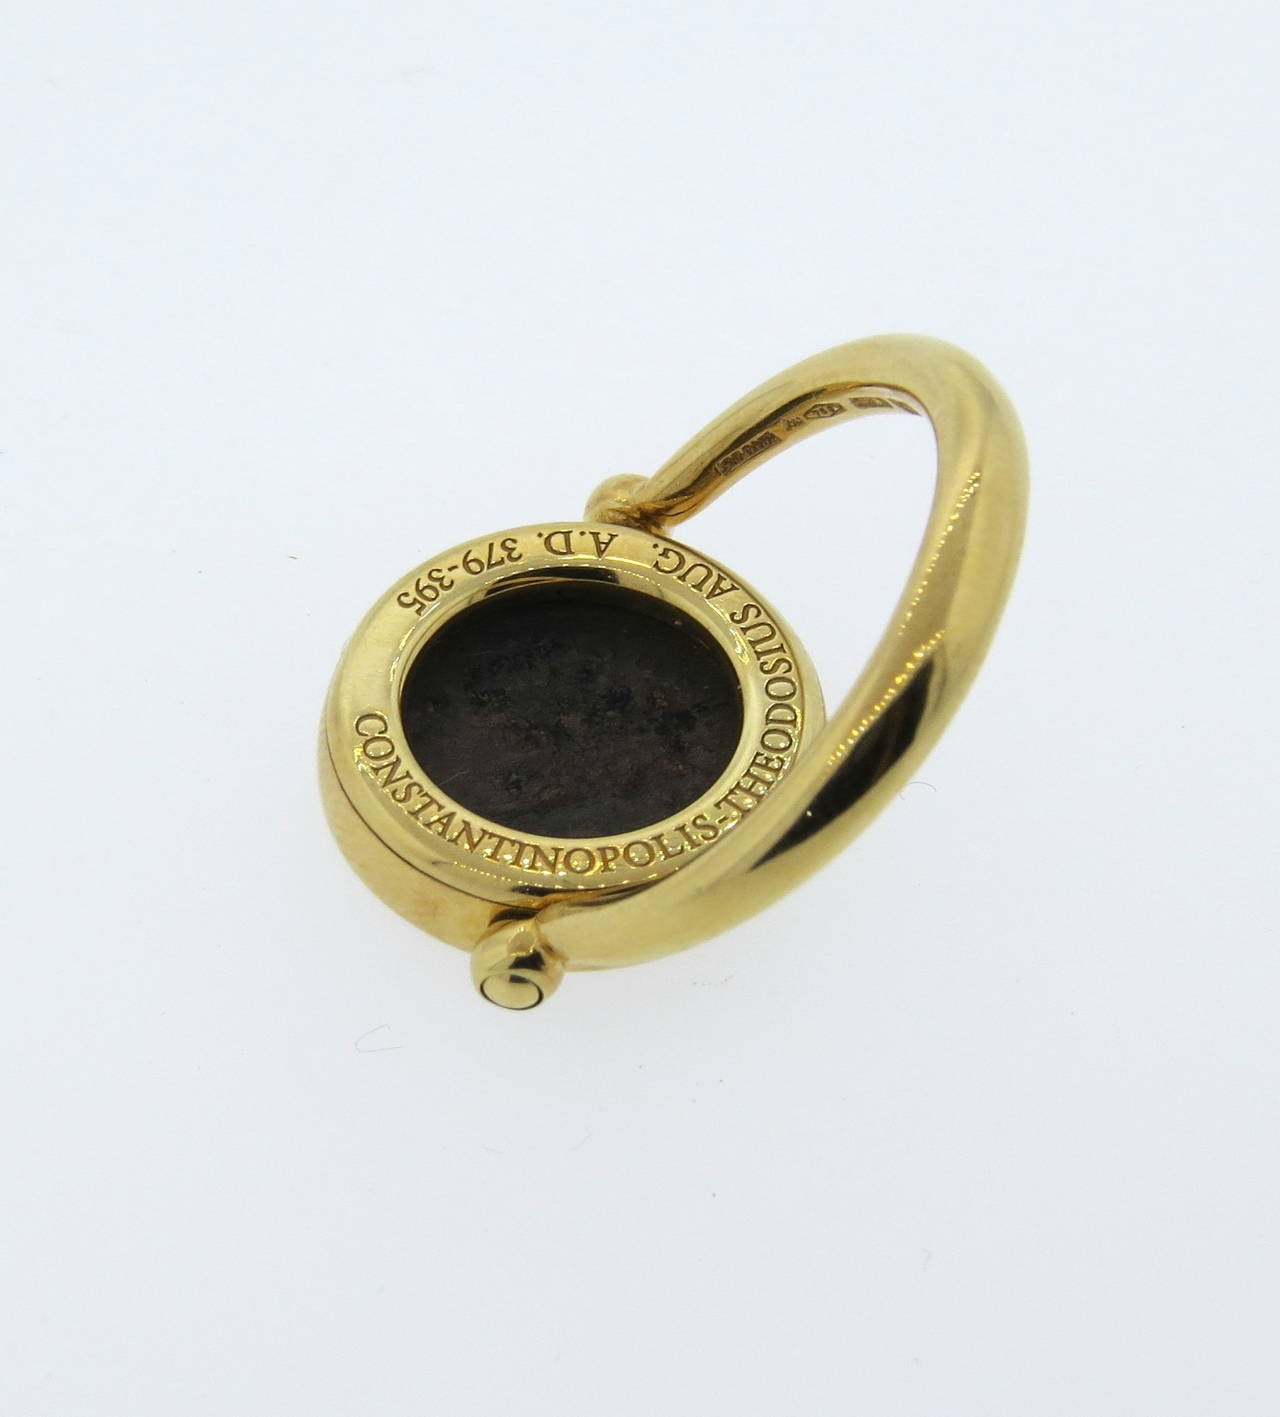 Bulgari 18k gold ring from Monete collection, featuring 12mm ancient coin with flip ring top . Ring size 6, ring top is 16mm in diameter. Marked Bvlgari, 750, made in Italy. weight - 9.8 grams
Comes in Bulgari box